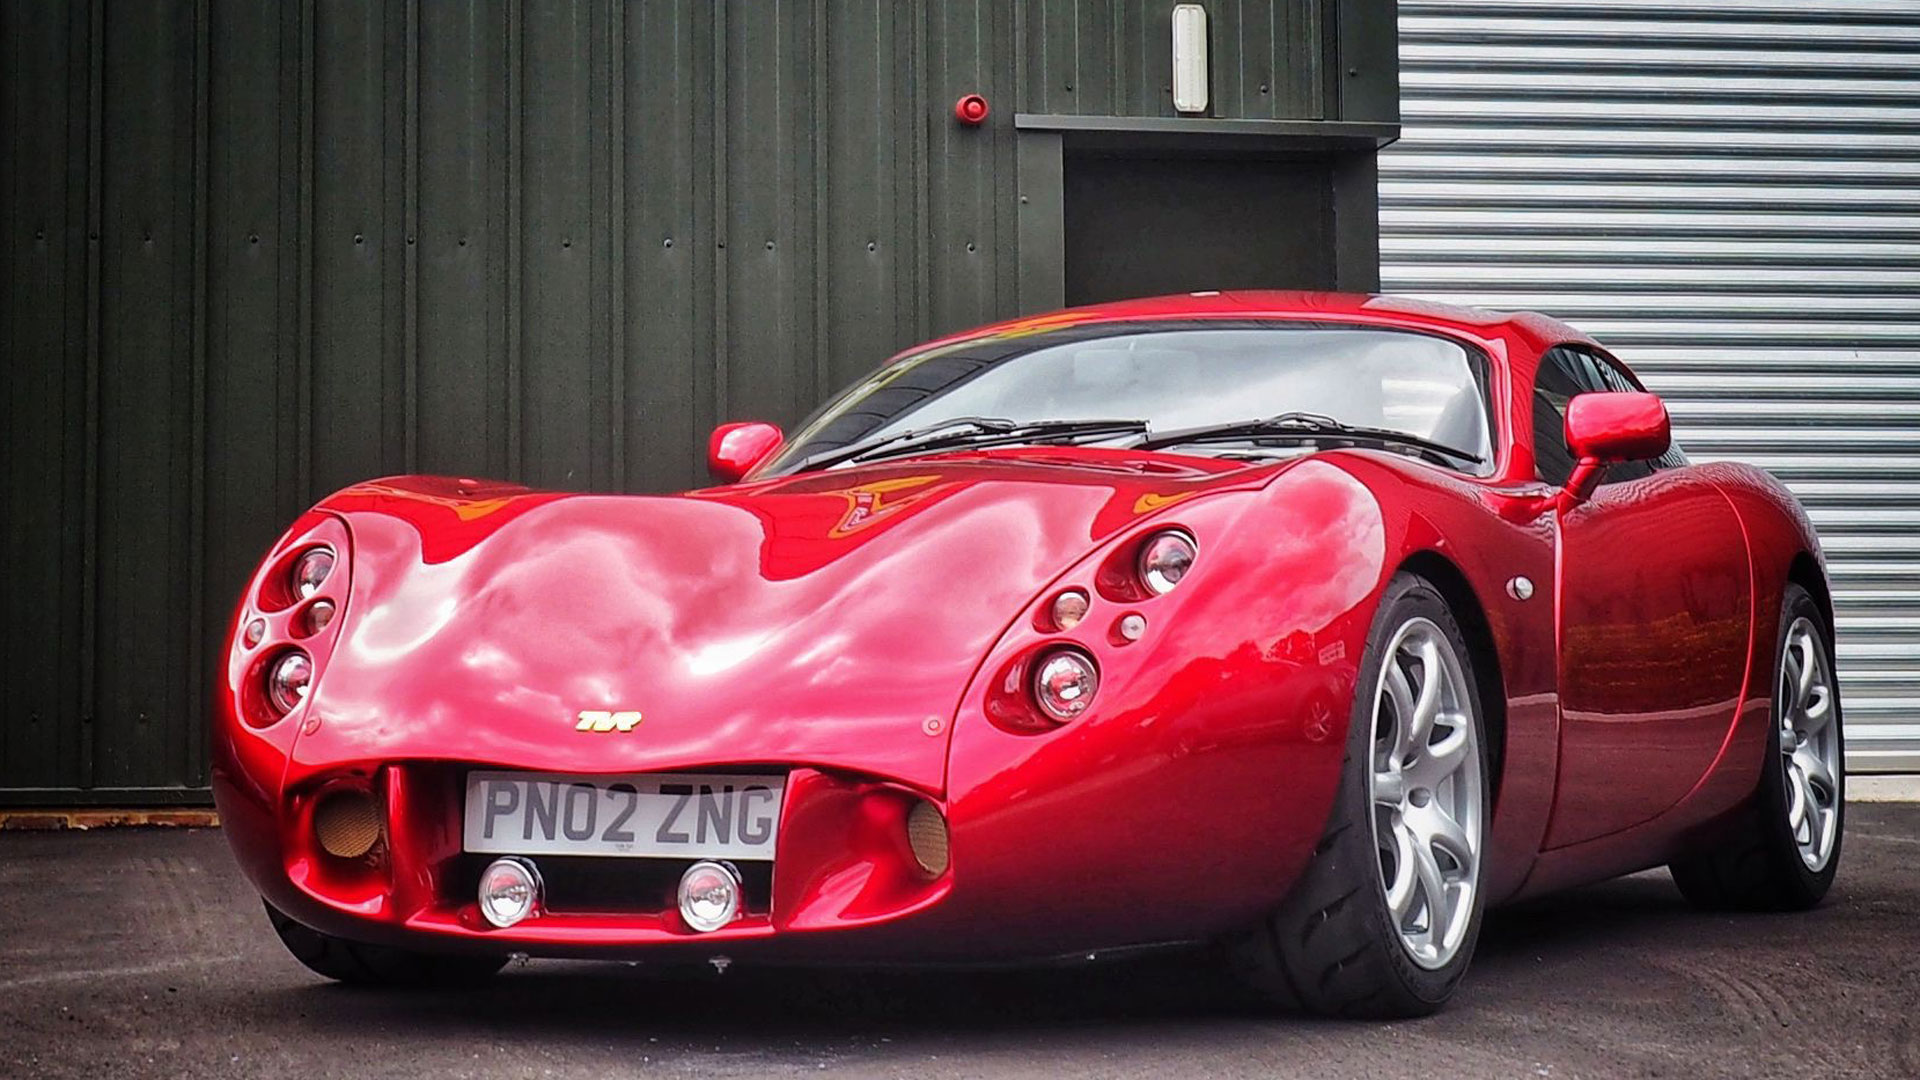 2002 TVR T440R